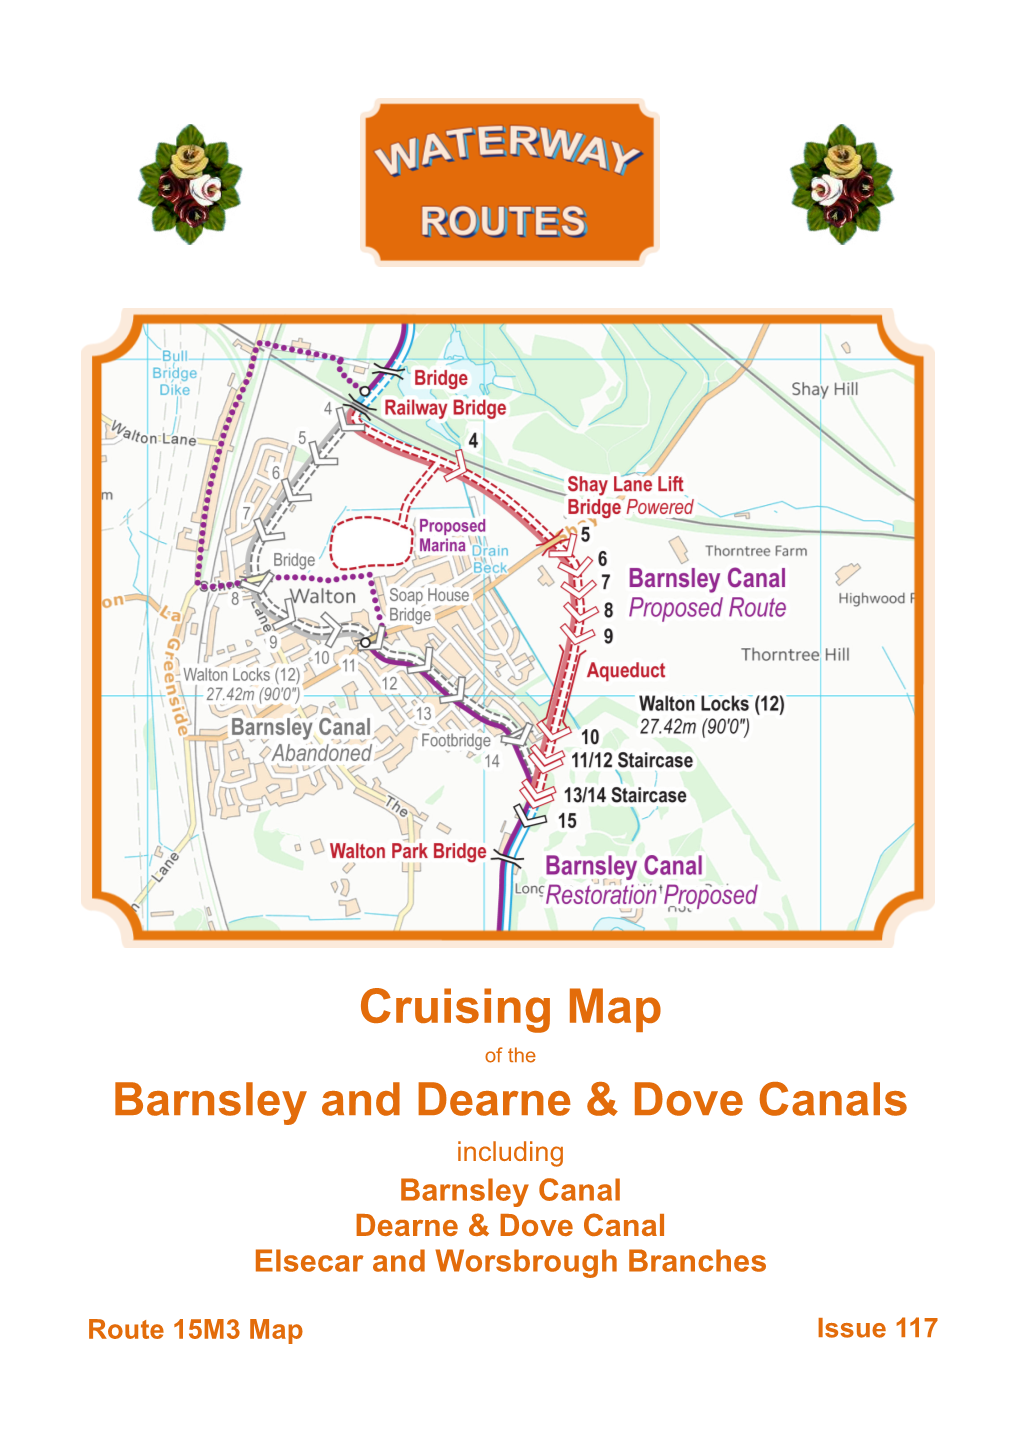 Barnsley and Dearne & Dove Canals